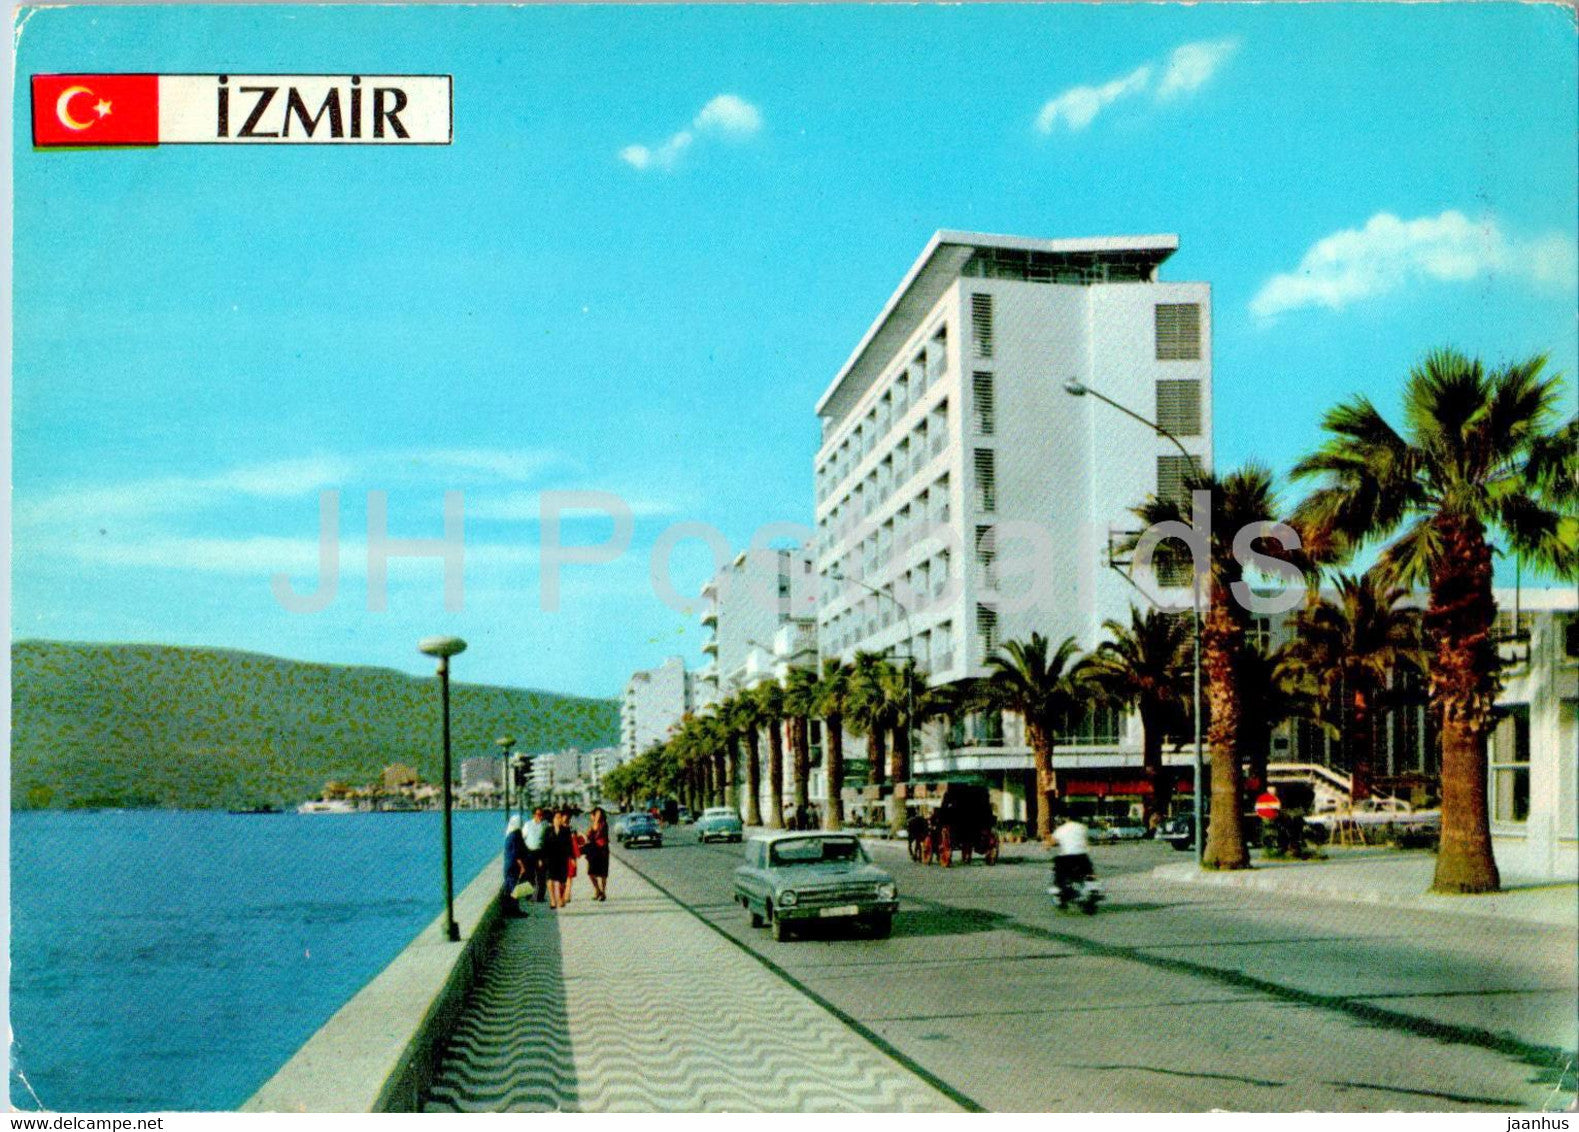 Izmir - A view from the seashore - car - 5002 - Turkey - unused - JH Postcards